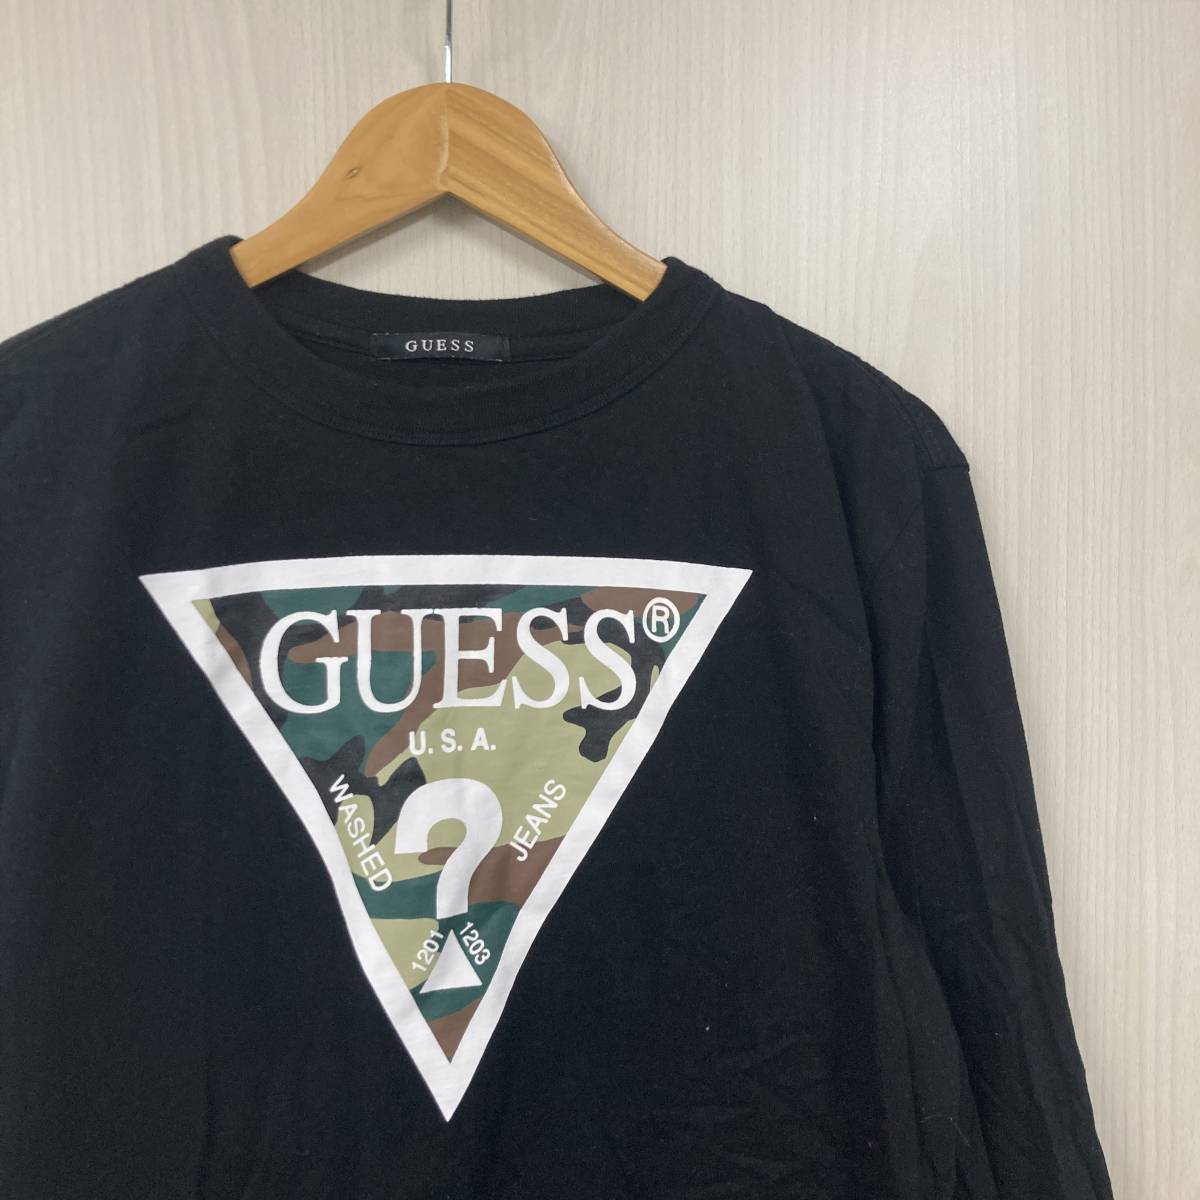 size S | SOPH. × GUESS | CAMOUFLAGE TRIANGLE CREW NECK L/S TEE | BLACK | SOPHNET. ソフネット ソフ ゲス | 長袖 Tシャツ | ブラック